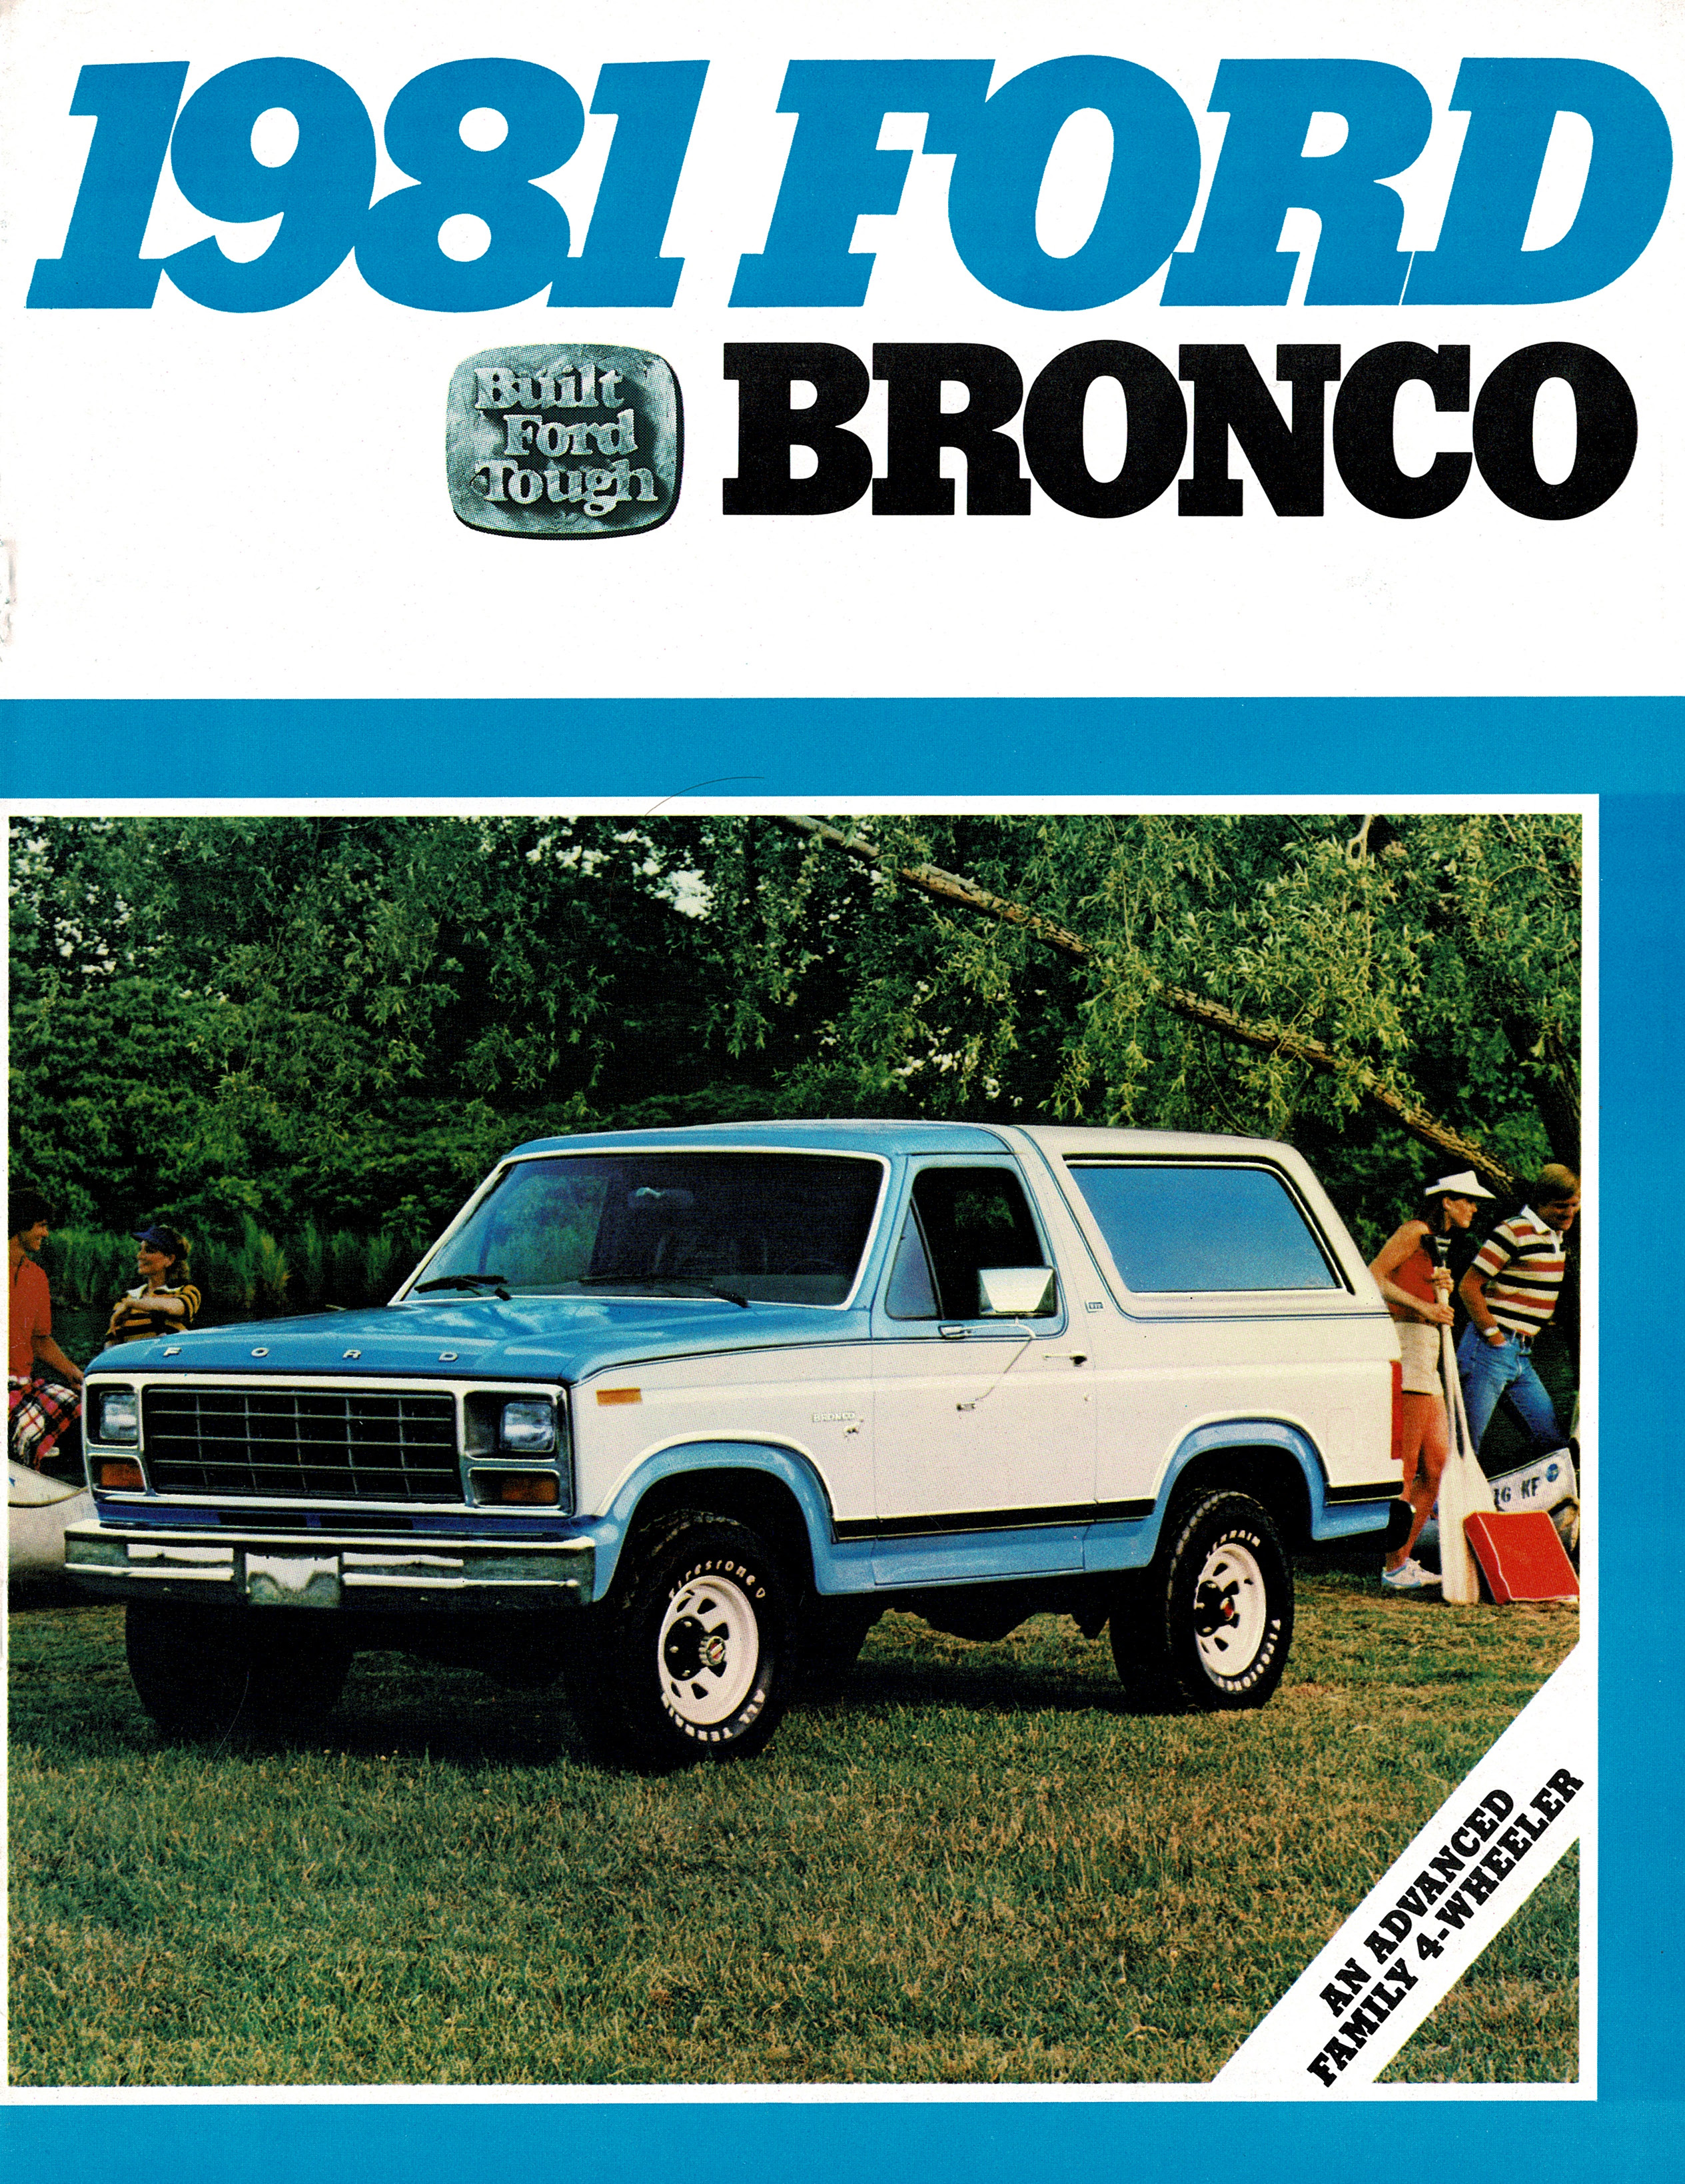 1981 Ford Bronco 09-80 Canada_Page_1